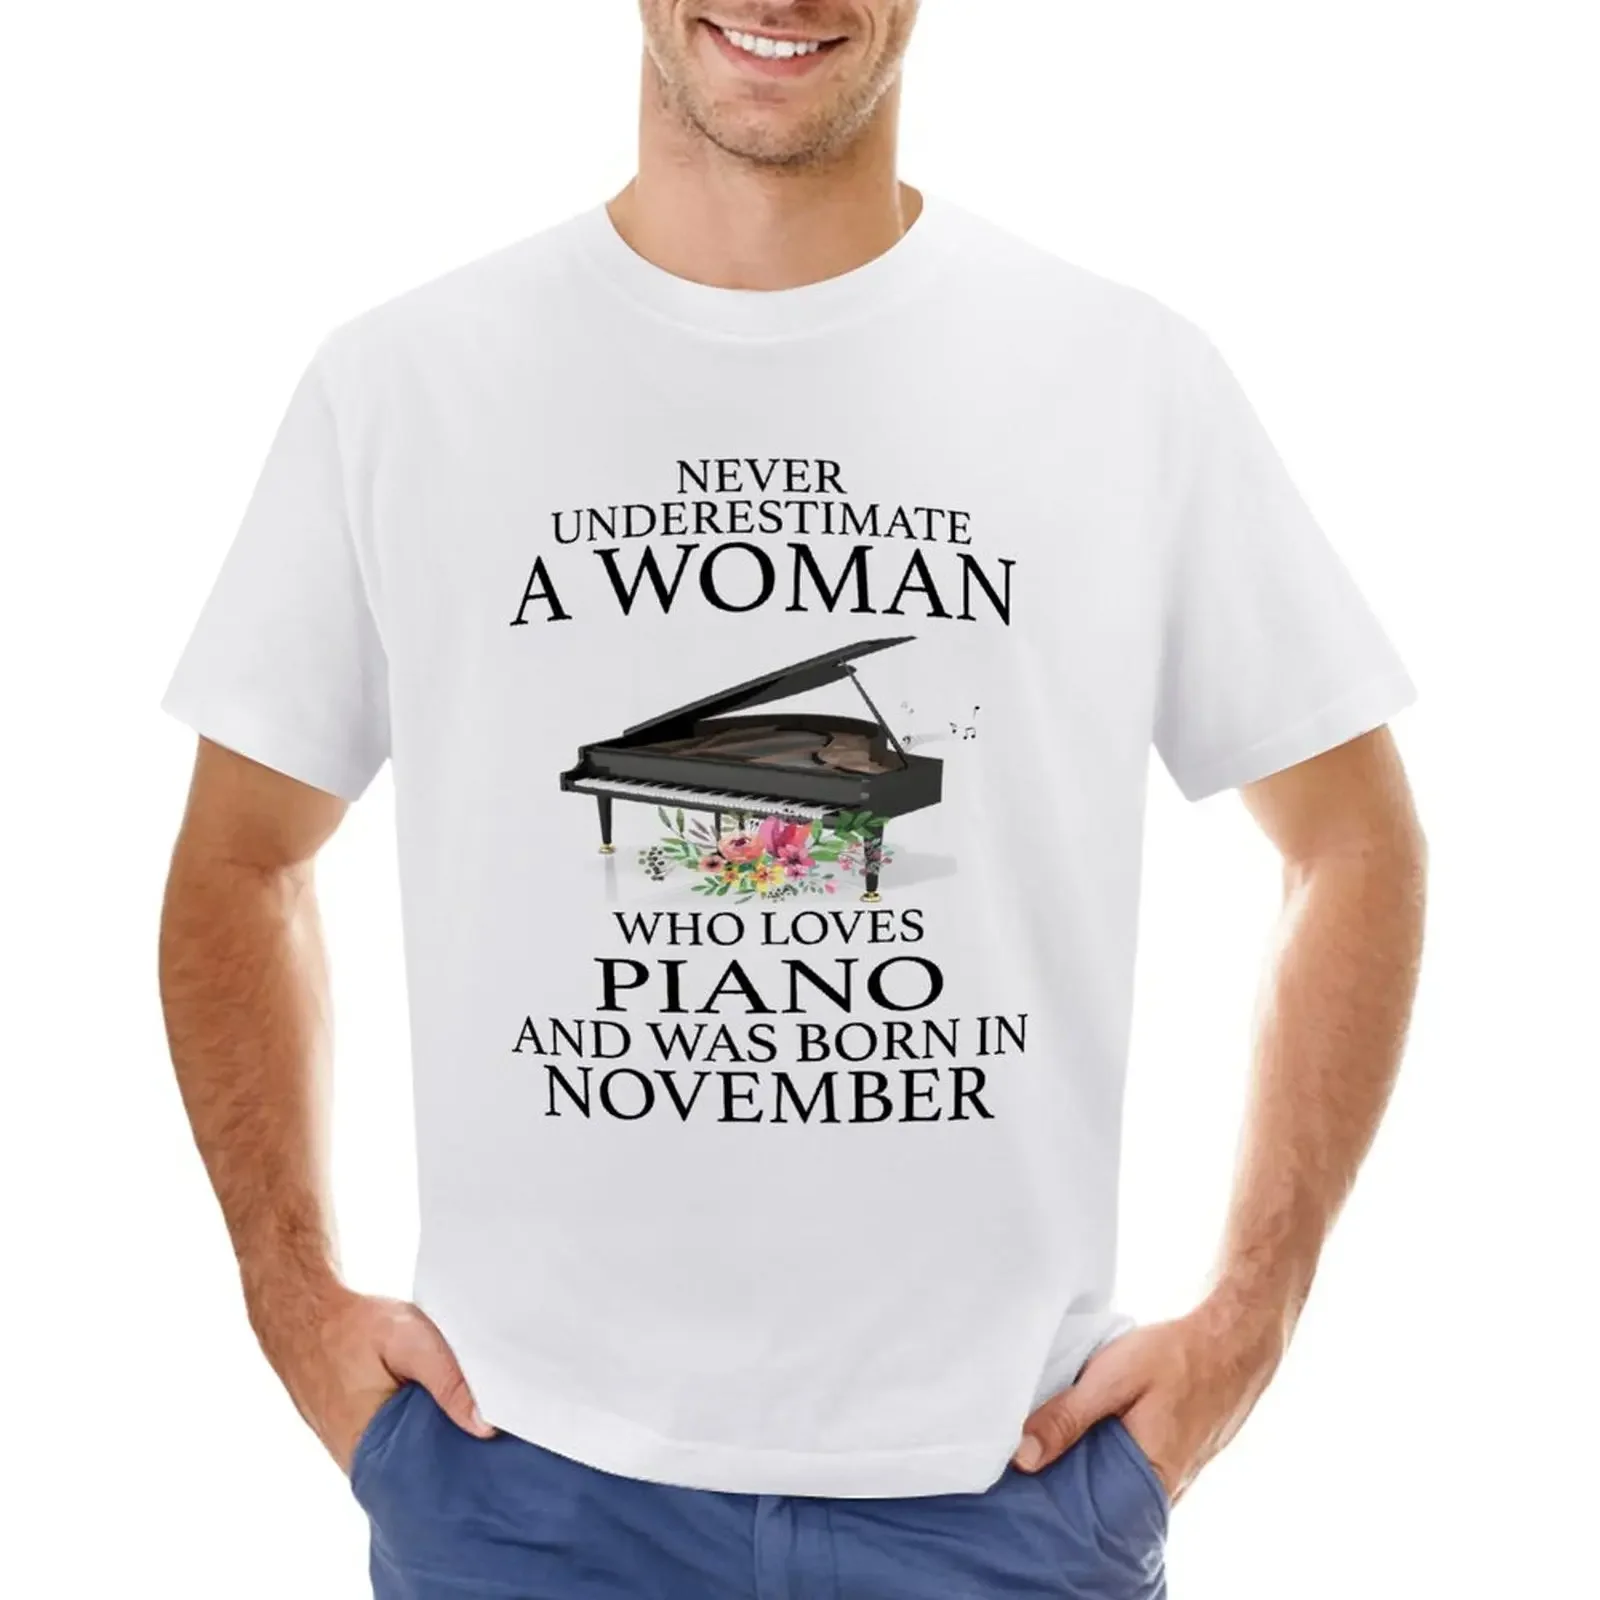 

Never Underestimate a Woman who Loves Piano and was born in November T-Shirt plus sizes cute tops mens t shirt